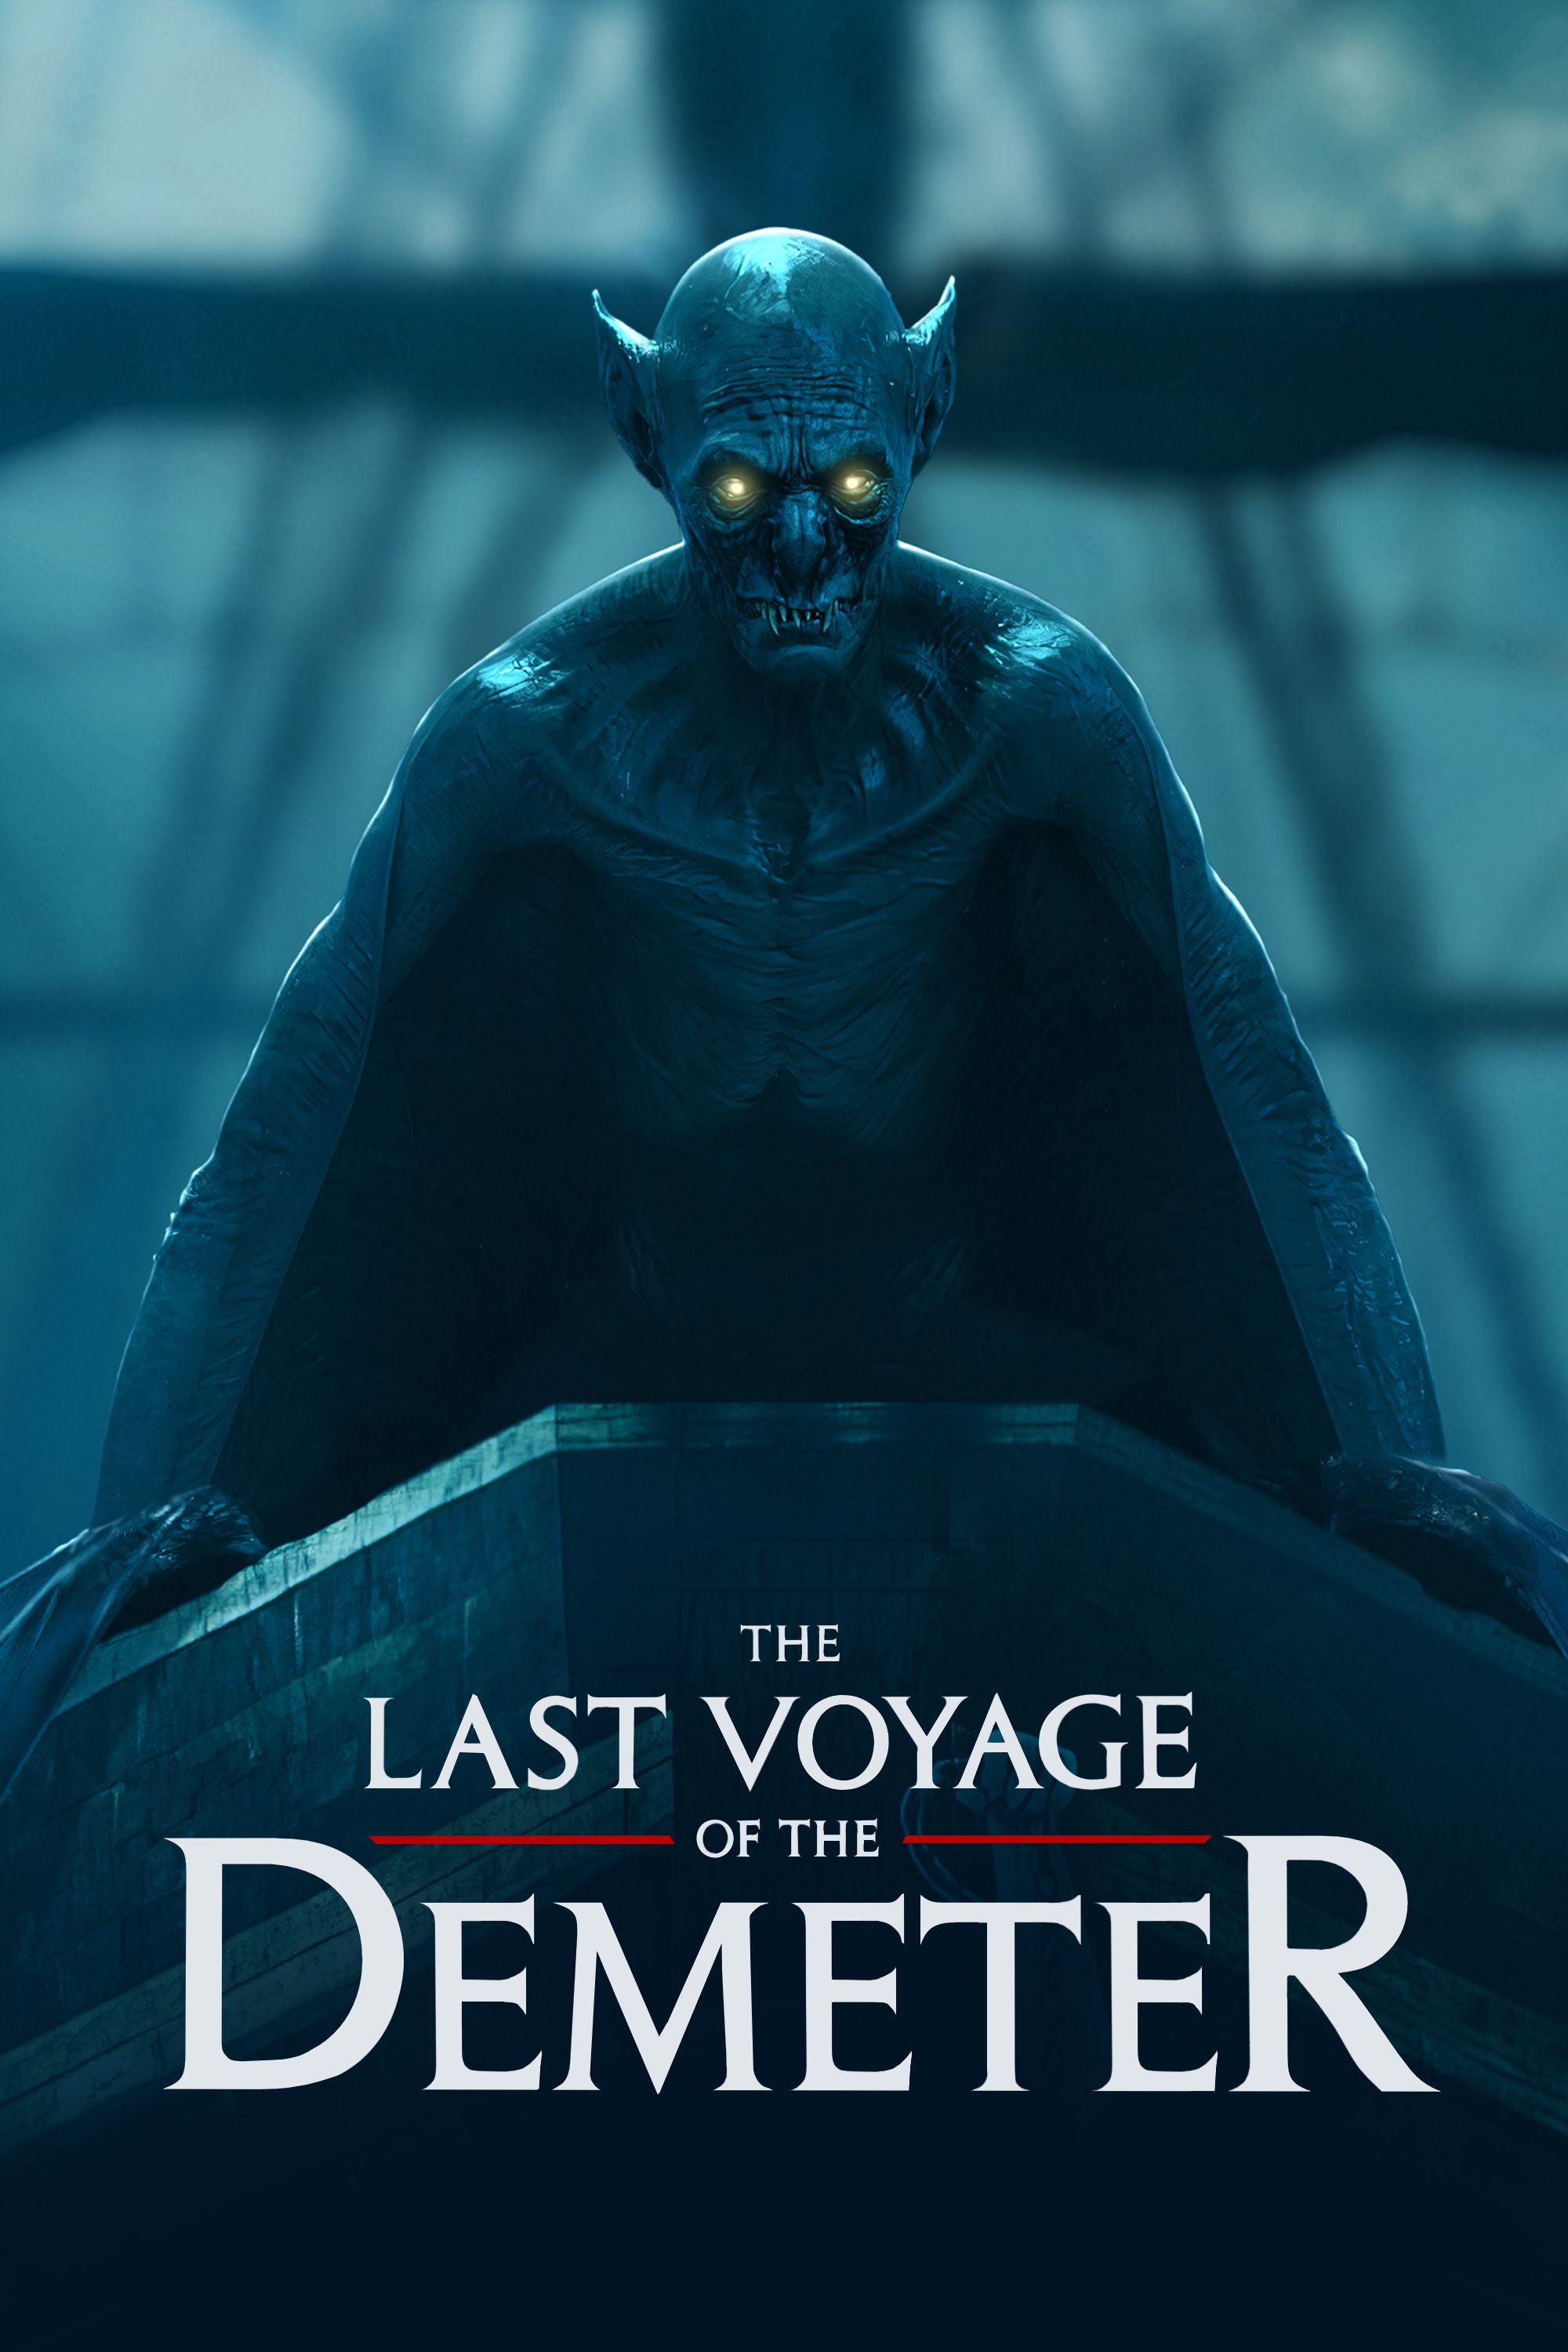 The Making of The Last Voyage of the Demeter